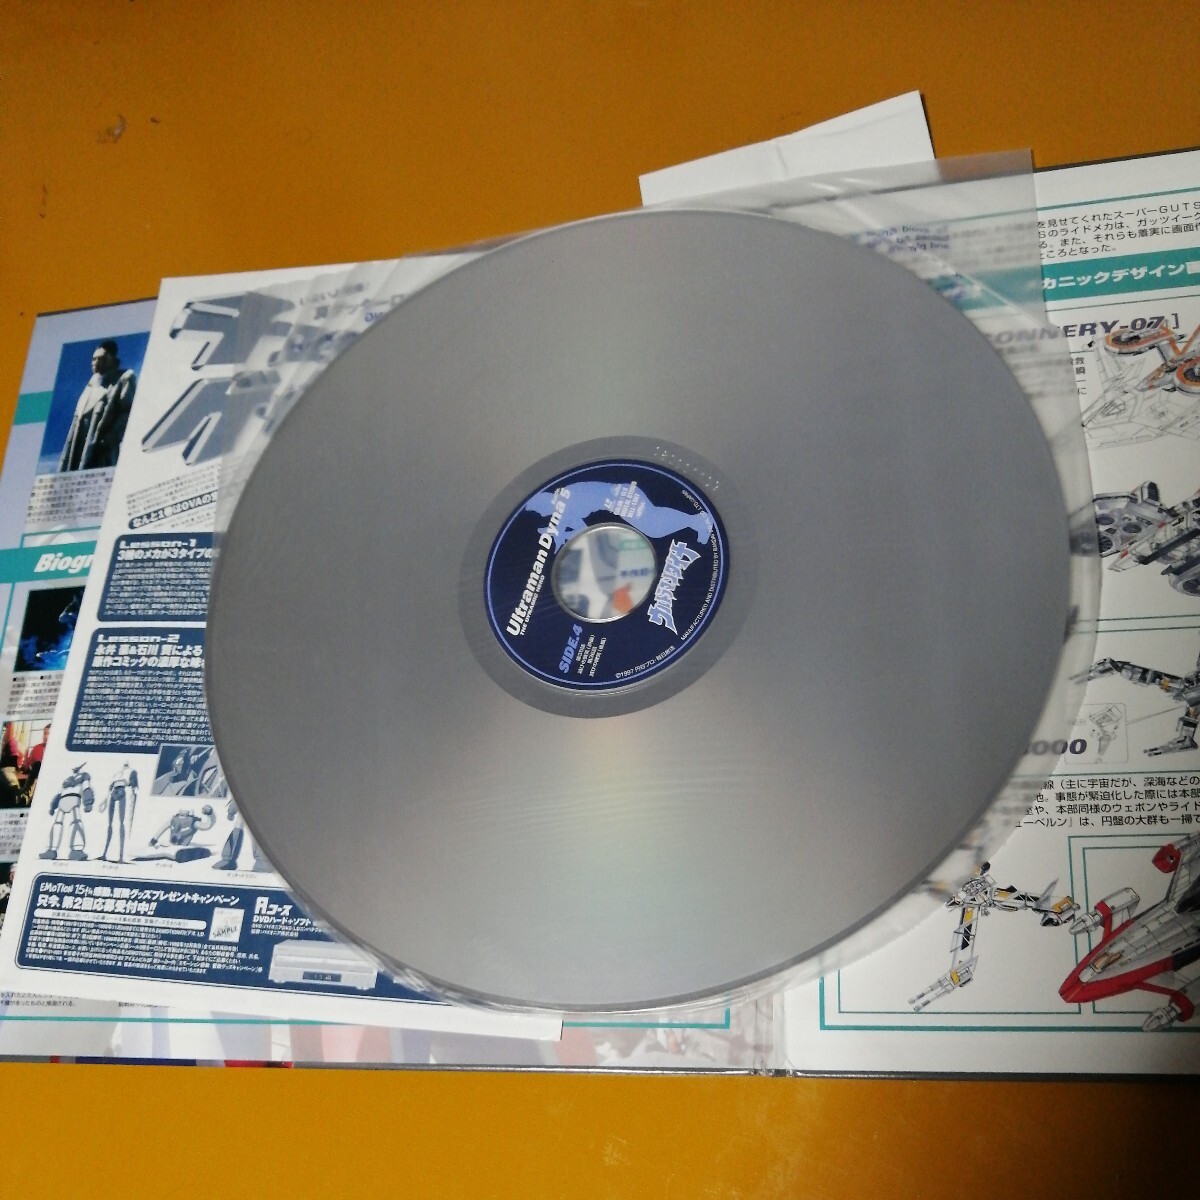  Ultraman Dyna 5 LD laser disk including carriage 